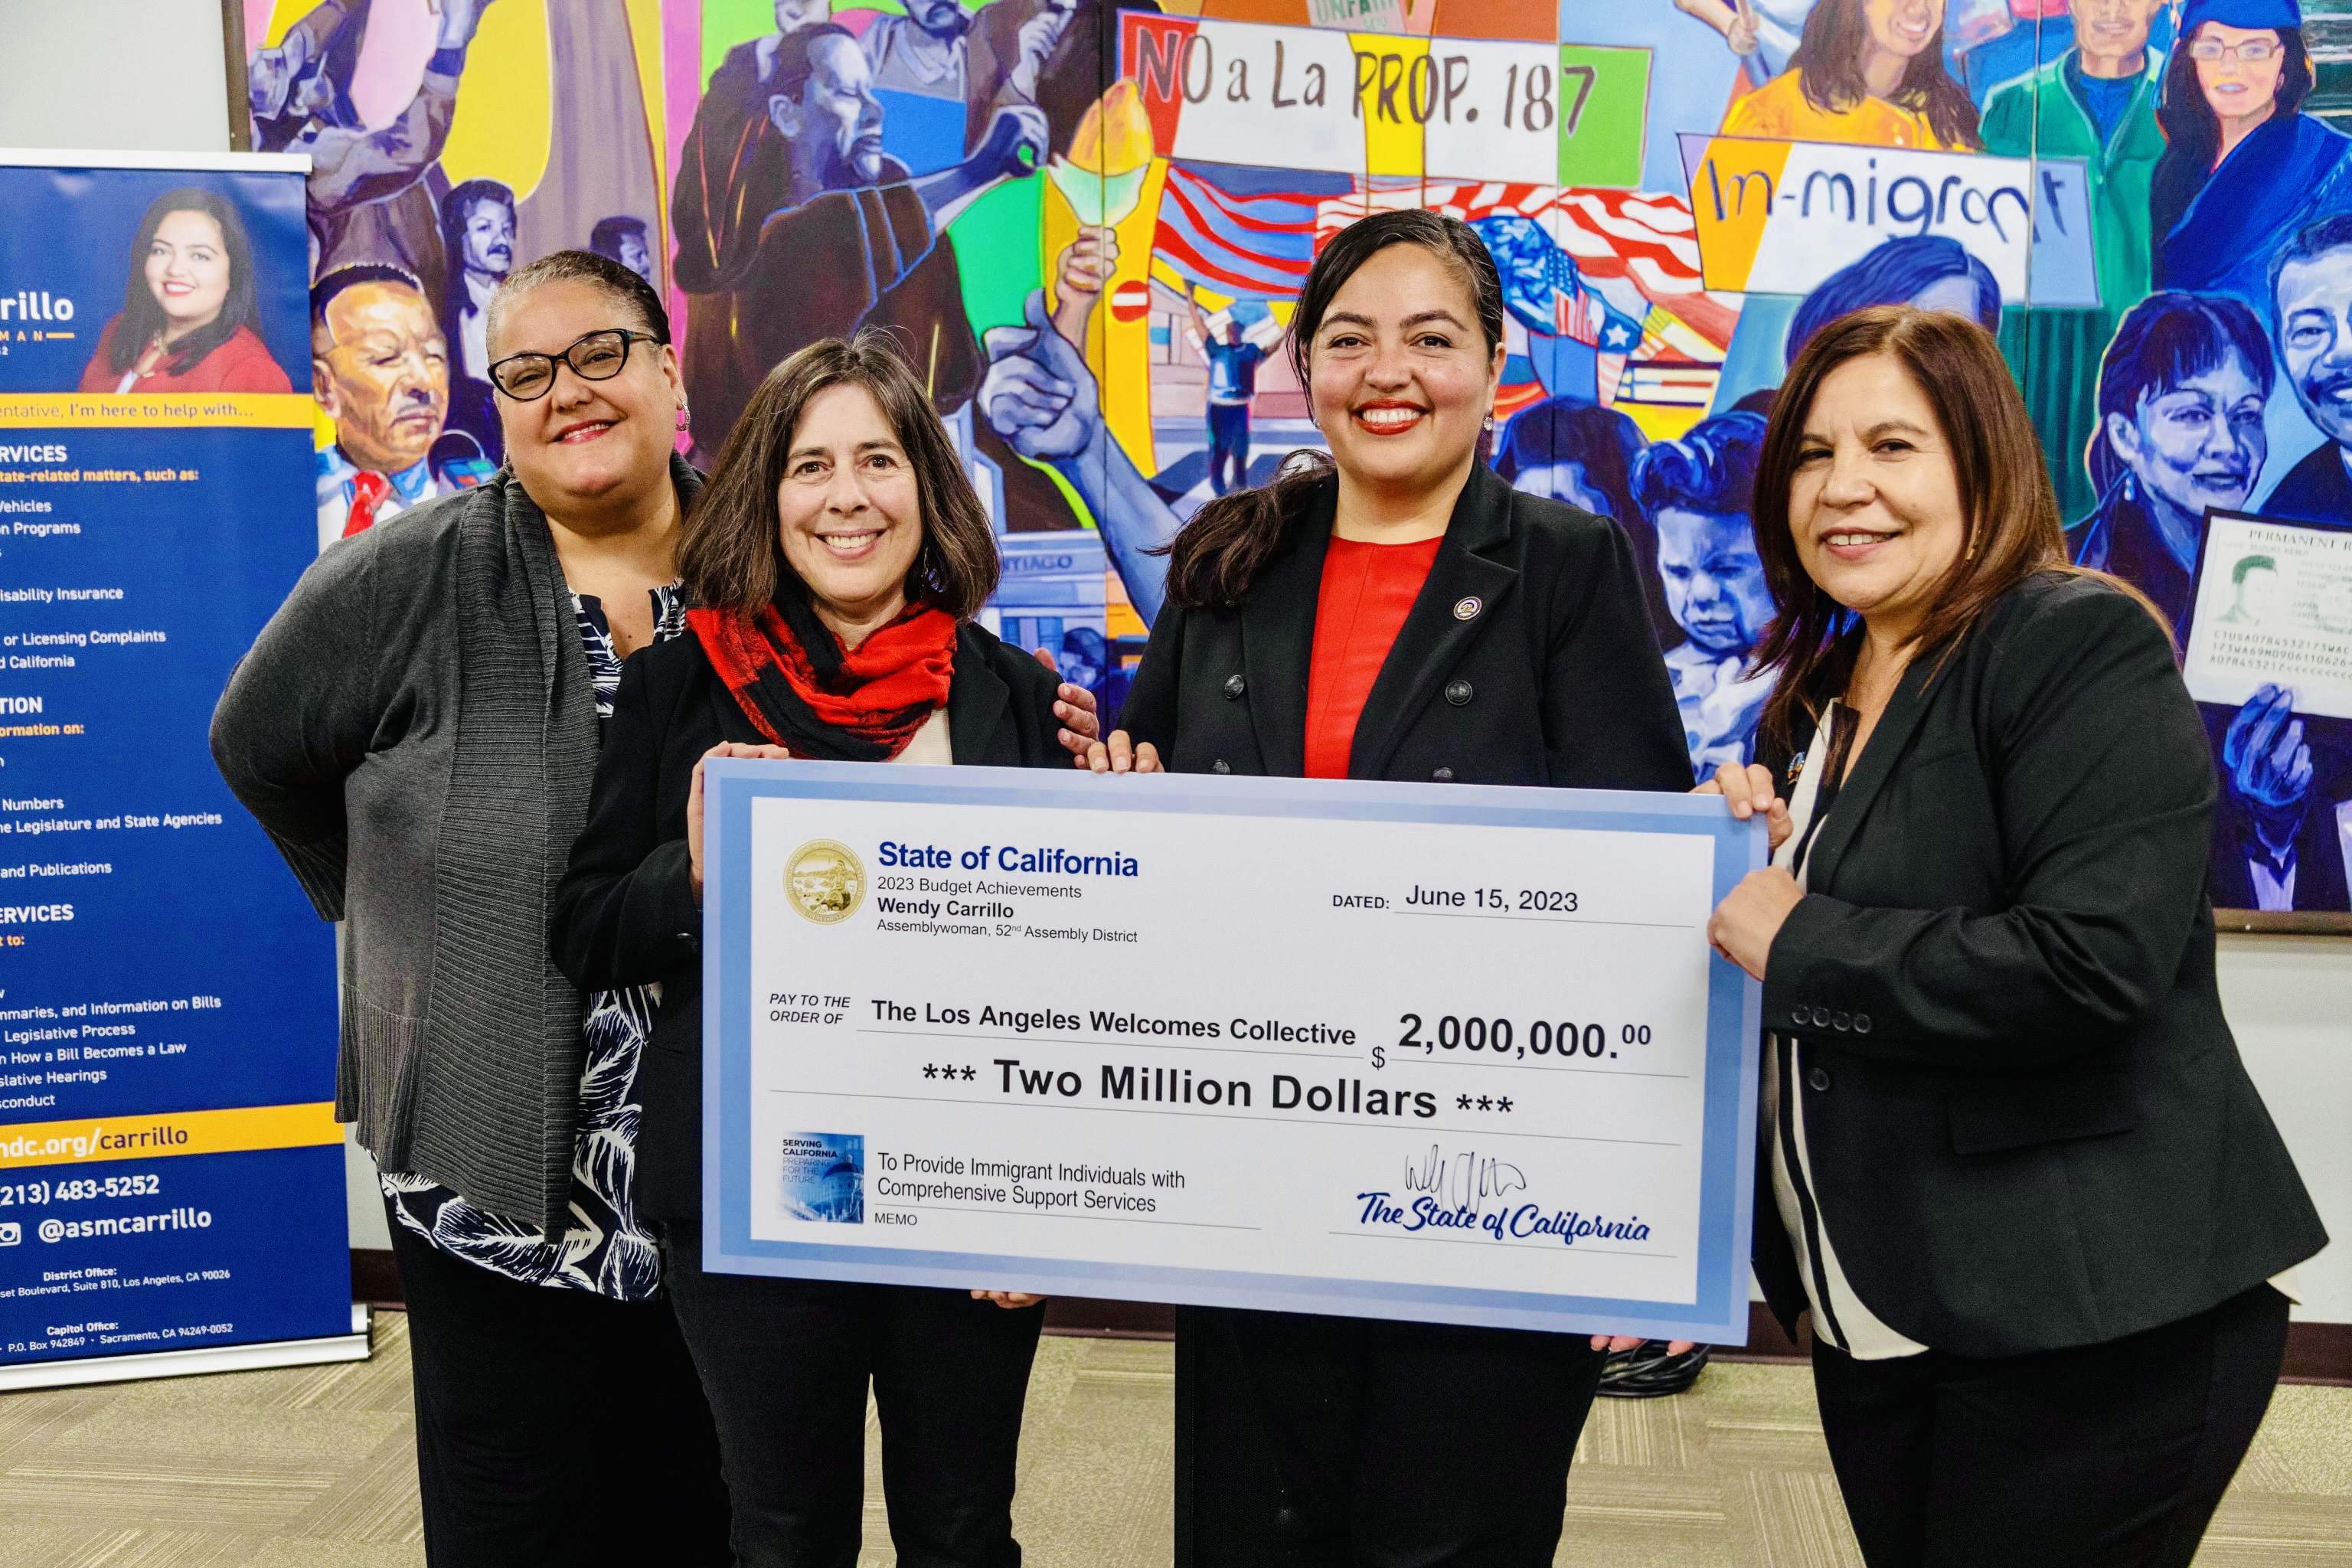 Assemblywoman Wendy Carrillo holds large symbolic check of $2million for the Los Angeles Welcomes Collective